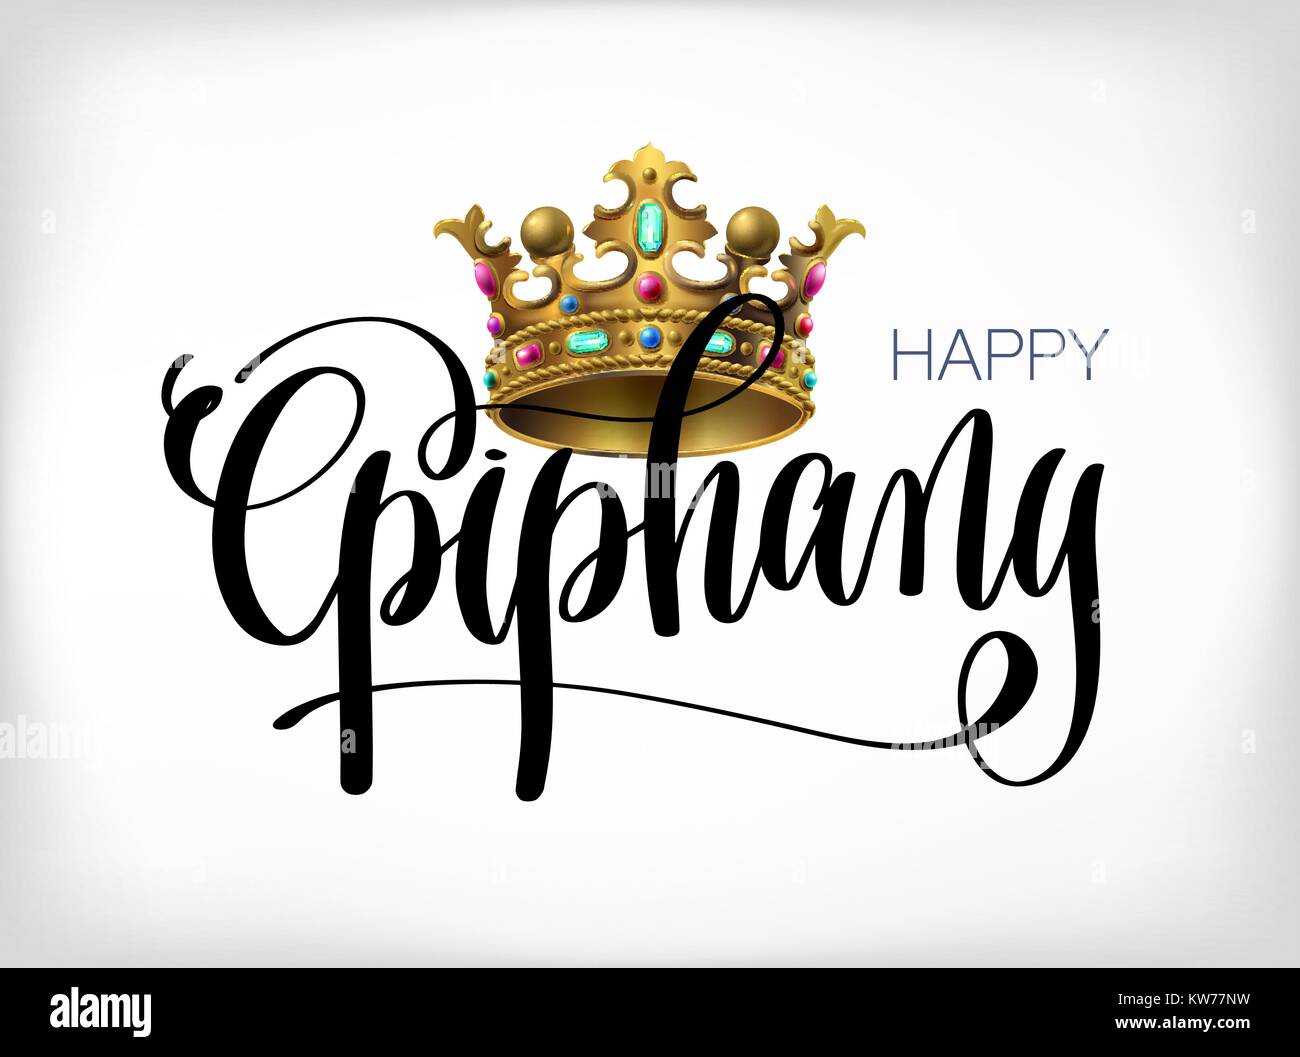 happy epiphany - hand lettering text with kings crown Stock Vector